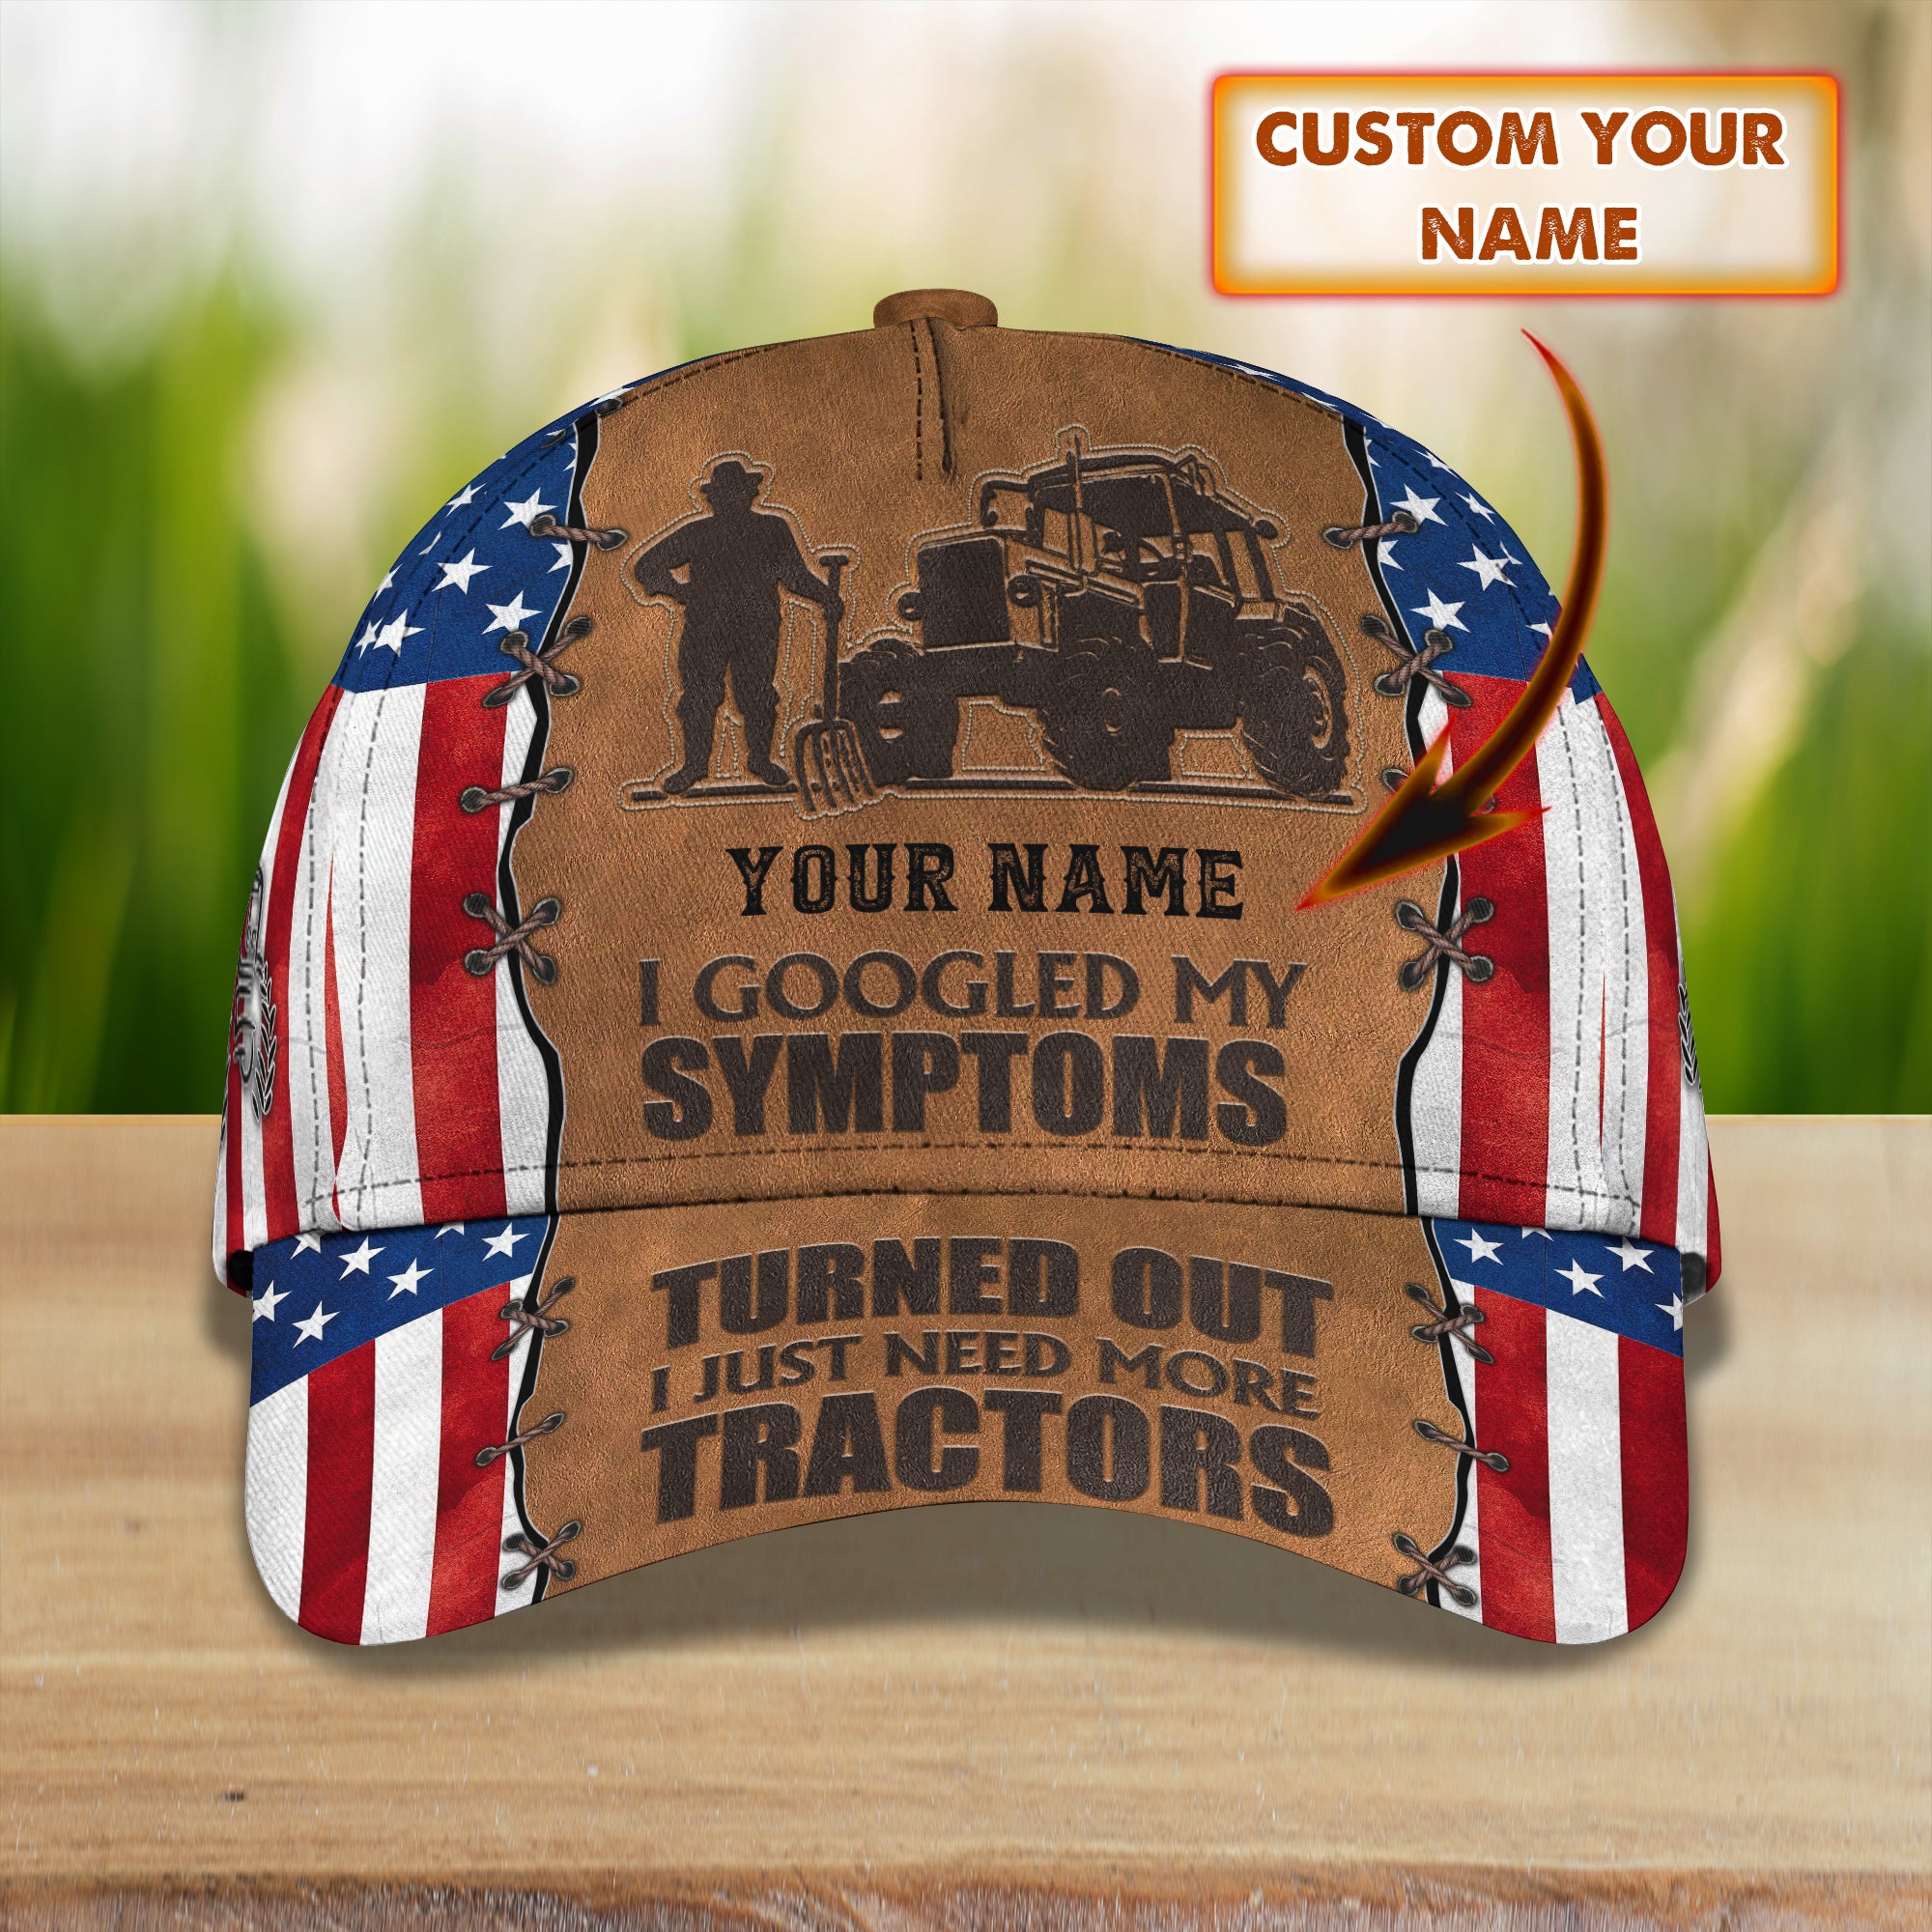 I Just Need More Tractors - Personalized Name Cap - Loop- T2k-202